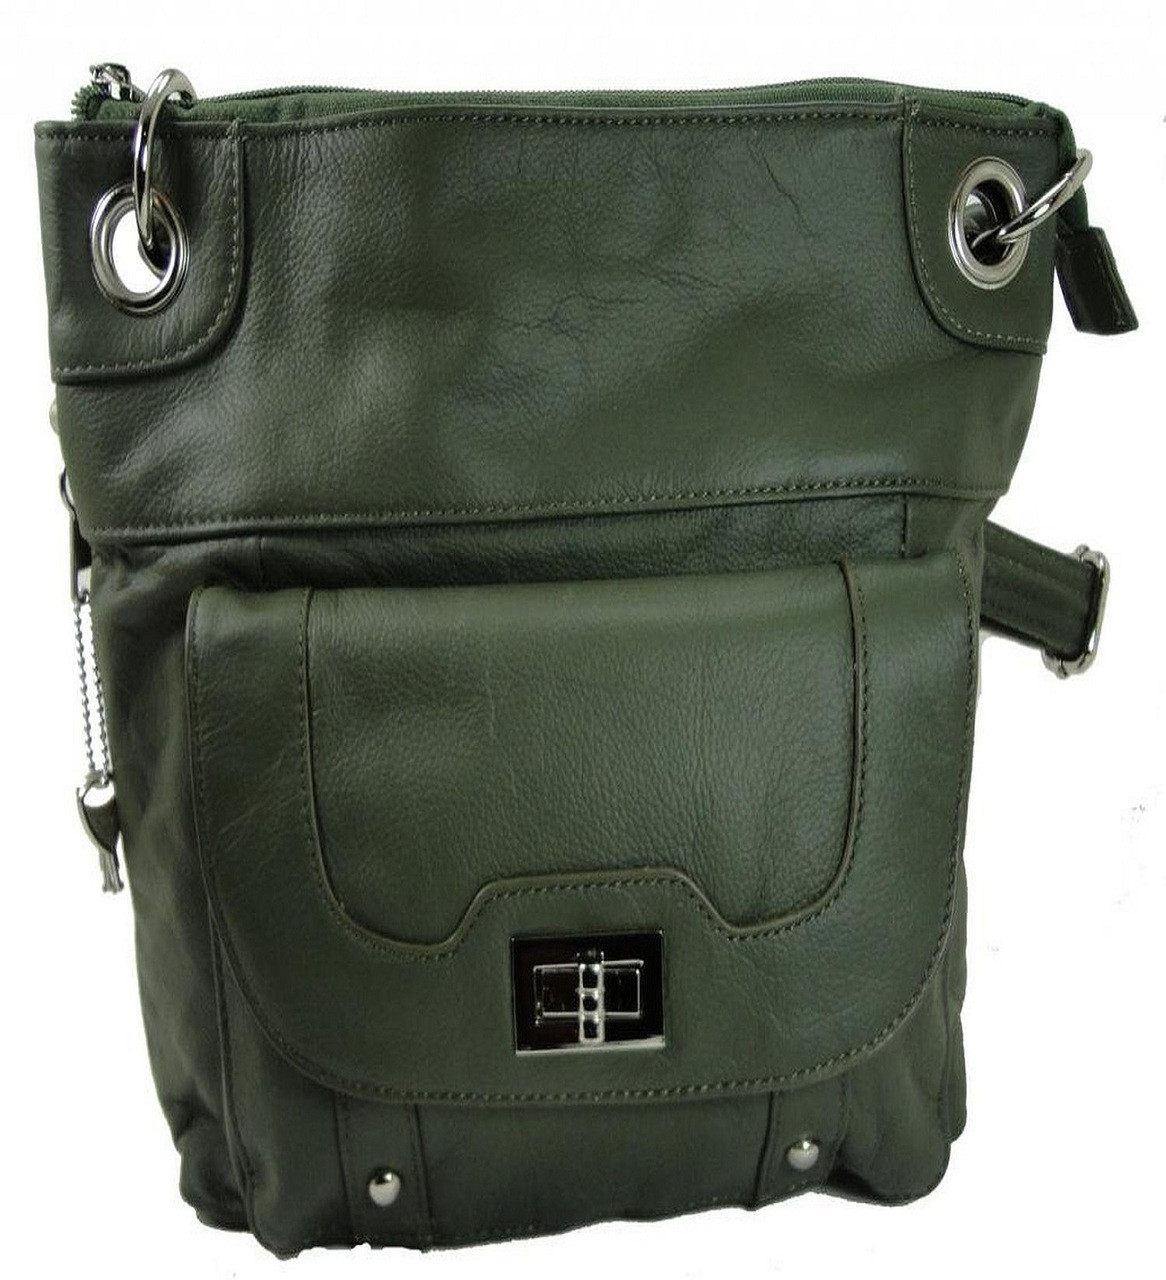 Concealed Carry Cross Body Leather Gun Purse with Locking Zipper Olive